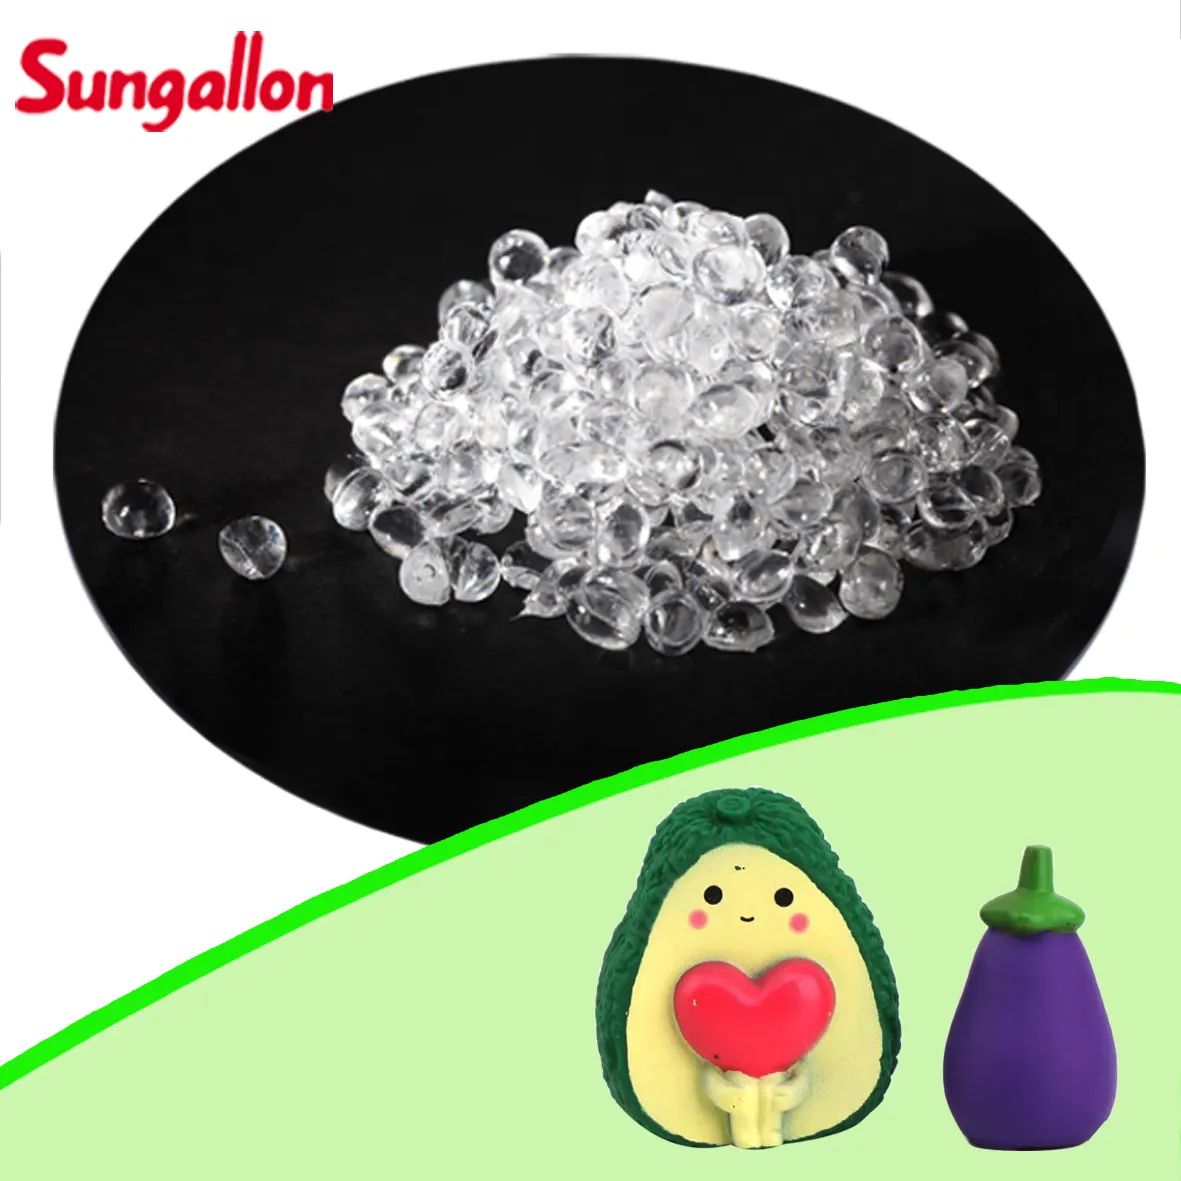 Sungallon GP100-1001 series TPE raw materials are used to make super transparent particles for toys